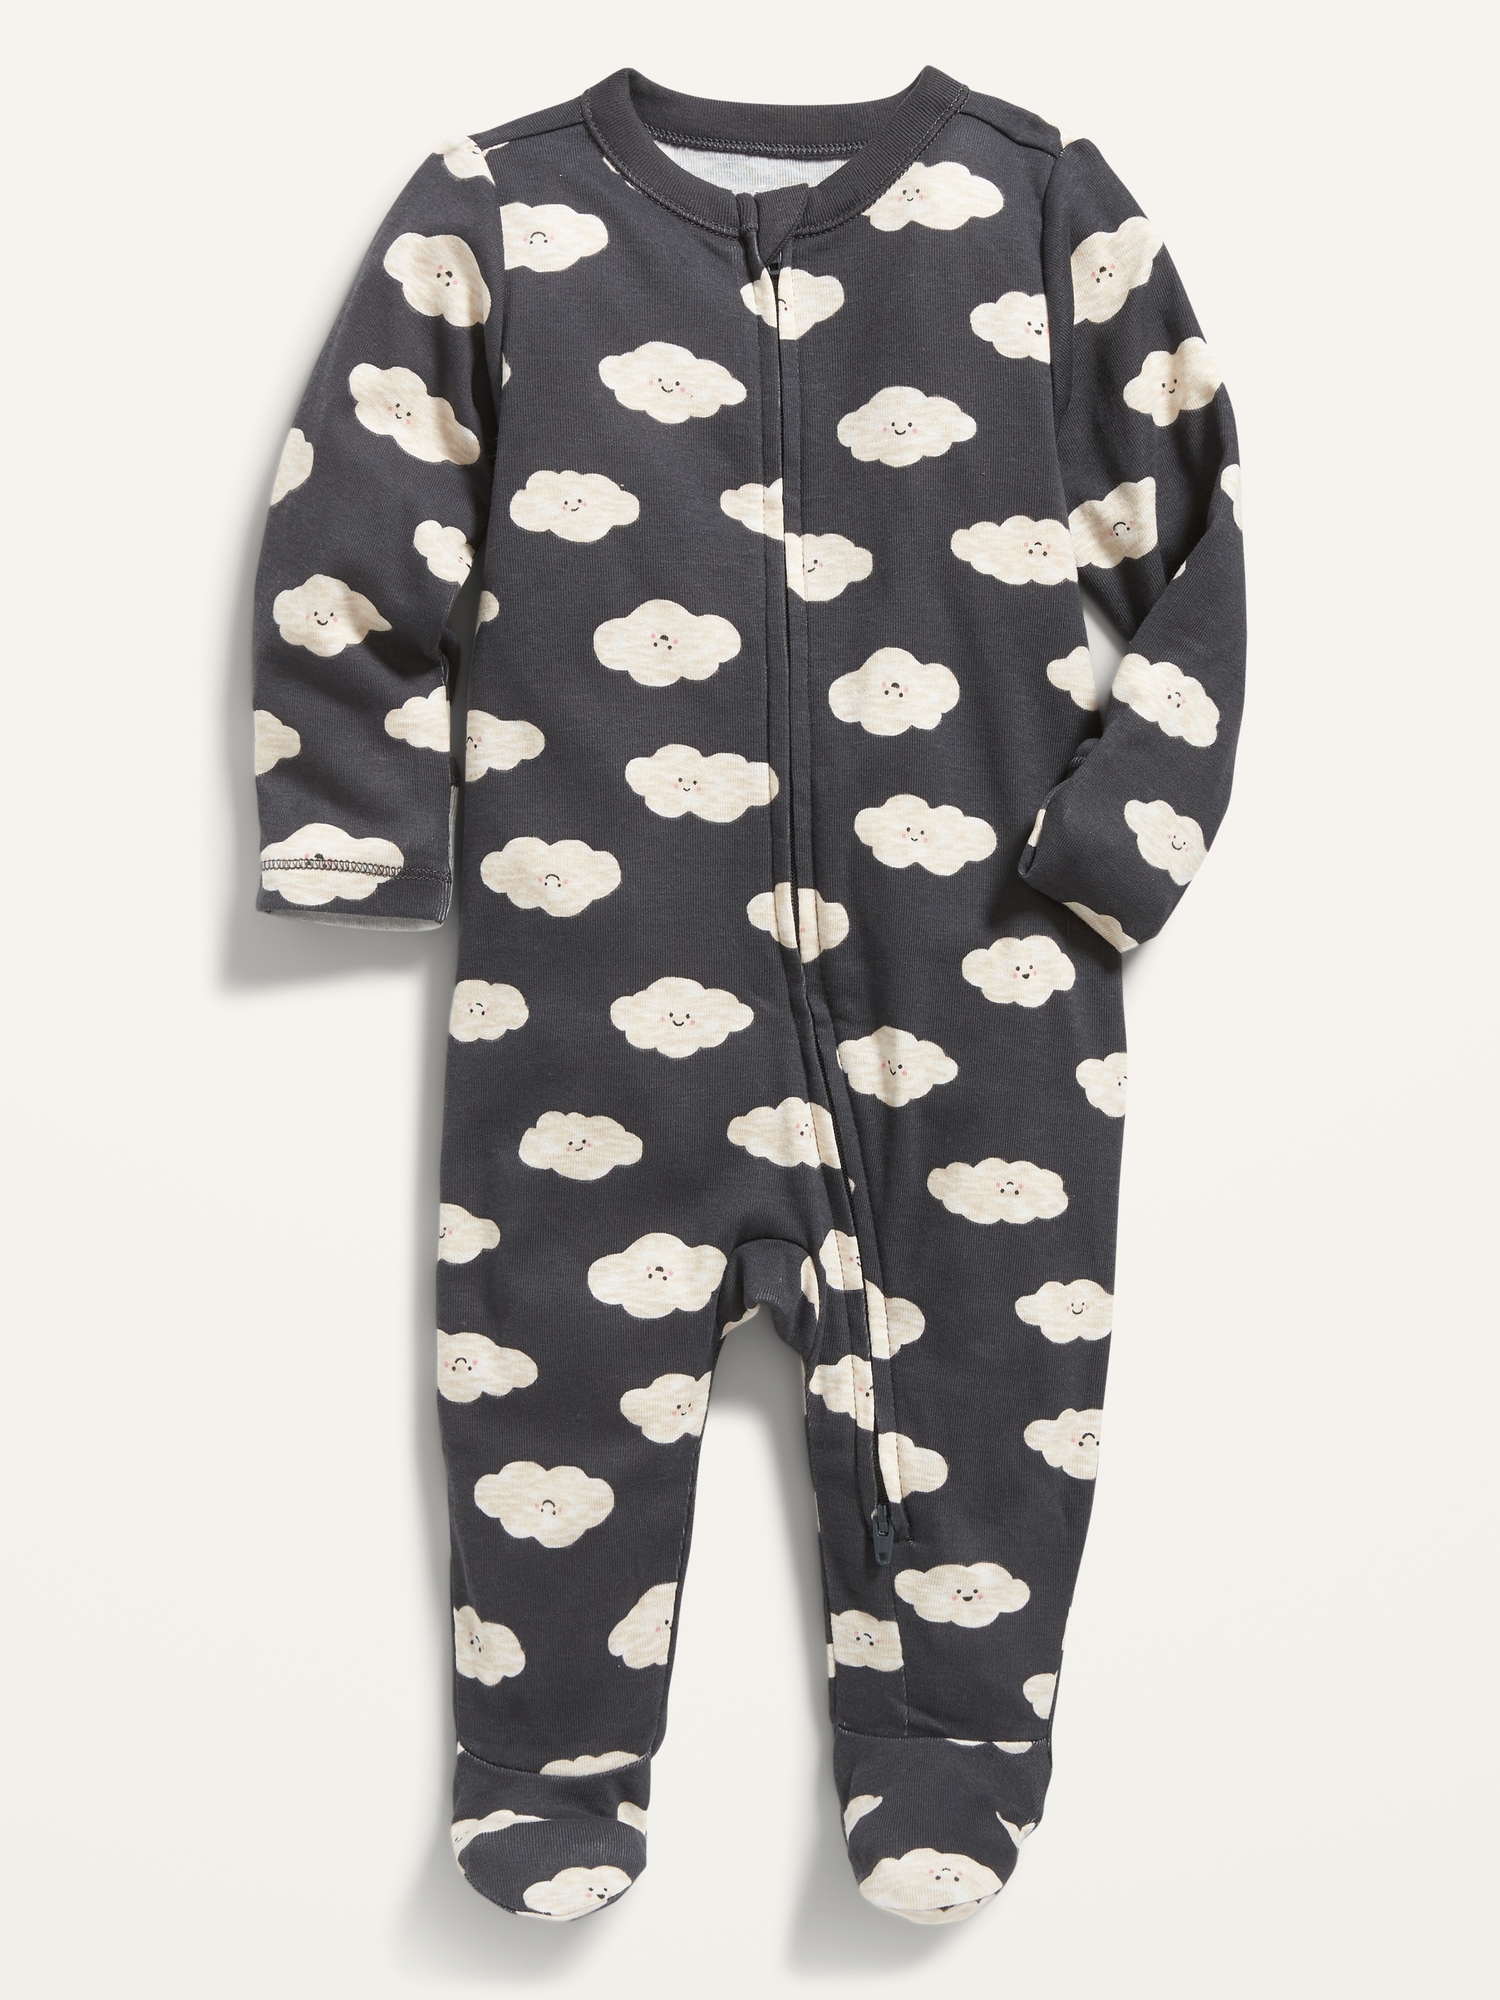 Old Navy Unisex Cloud-Print Sleep & Play Footed One-Piece for Baby gray. 1